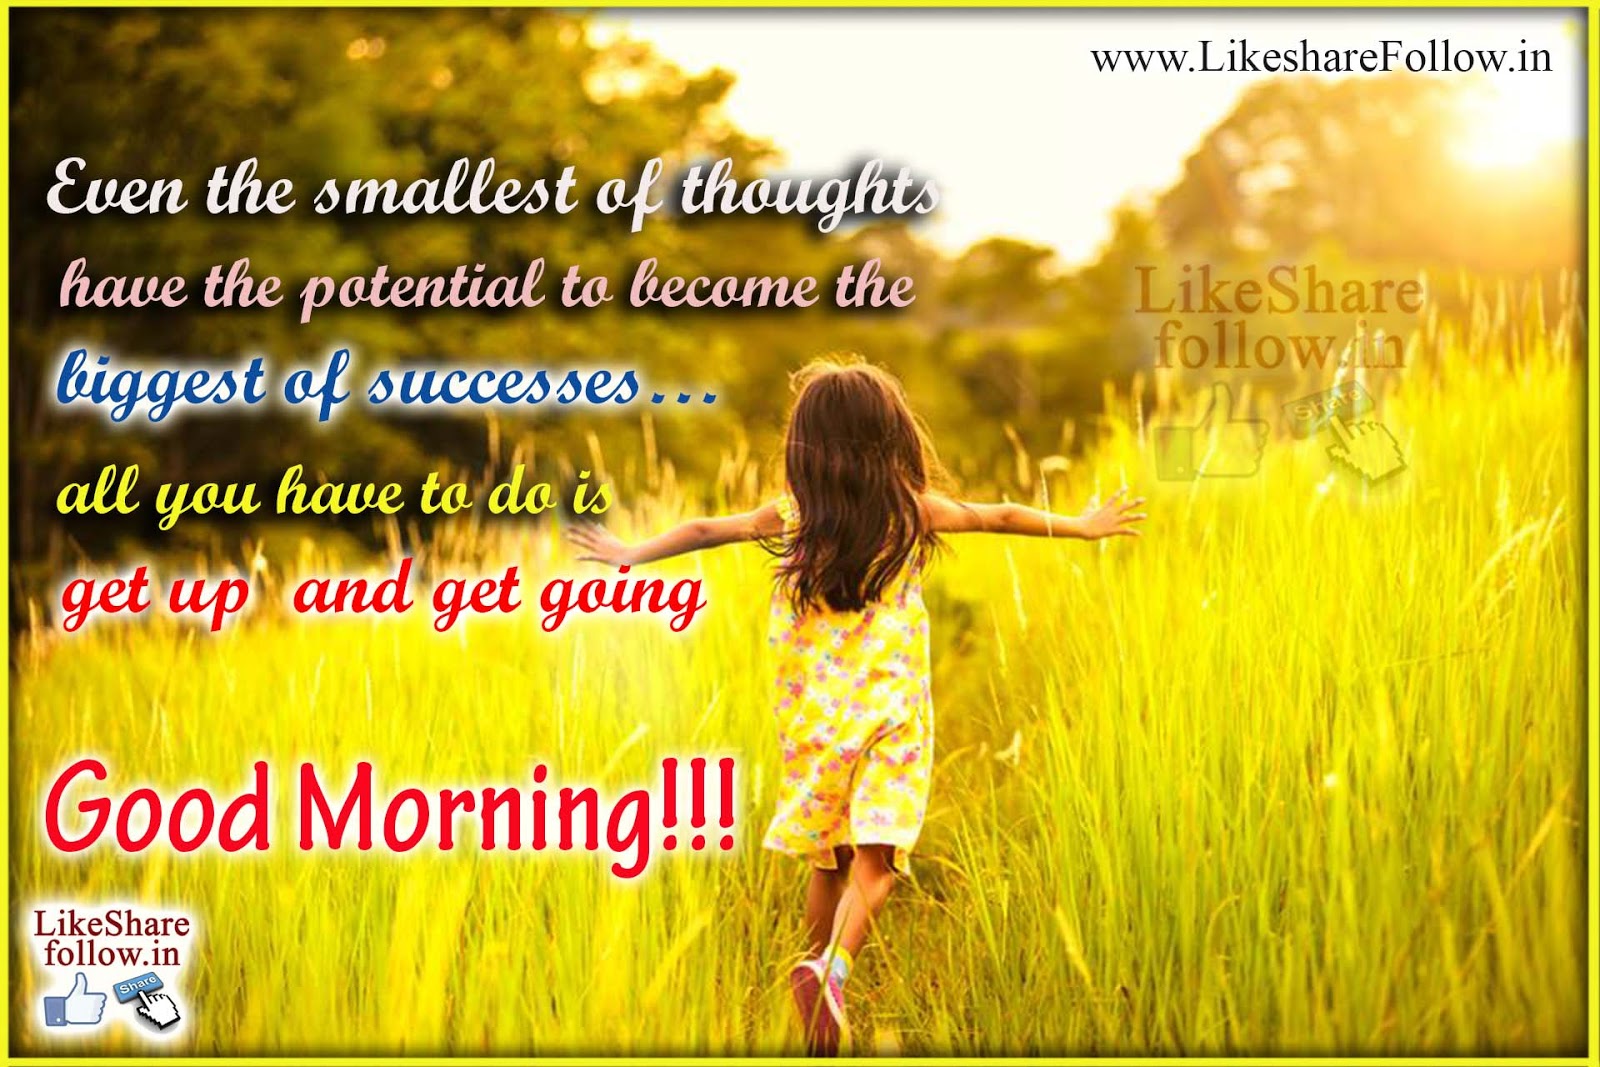 Best Good Morning Messages Wishes And Inspirational Quotes 2020 - Gambaran